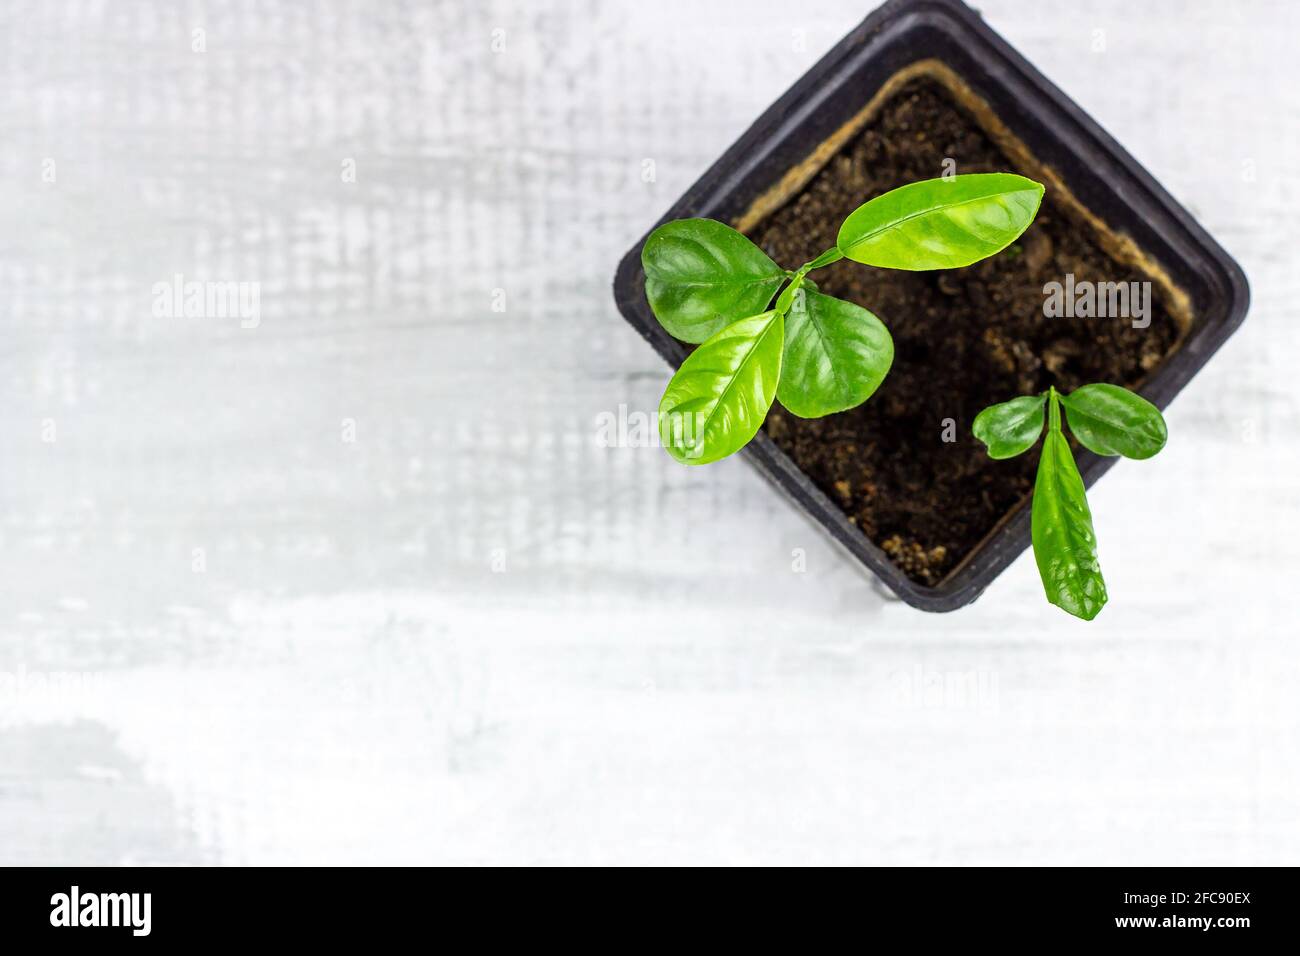 Top view of fresh green Fortunella margarita (Citrus reticulata) house plant little seedlings in the black flower pot on light background with copy sp Stock Photo